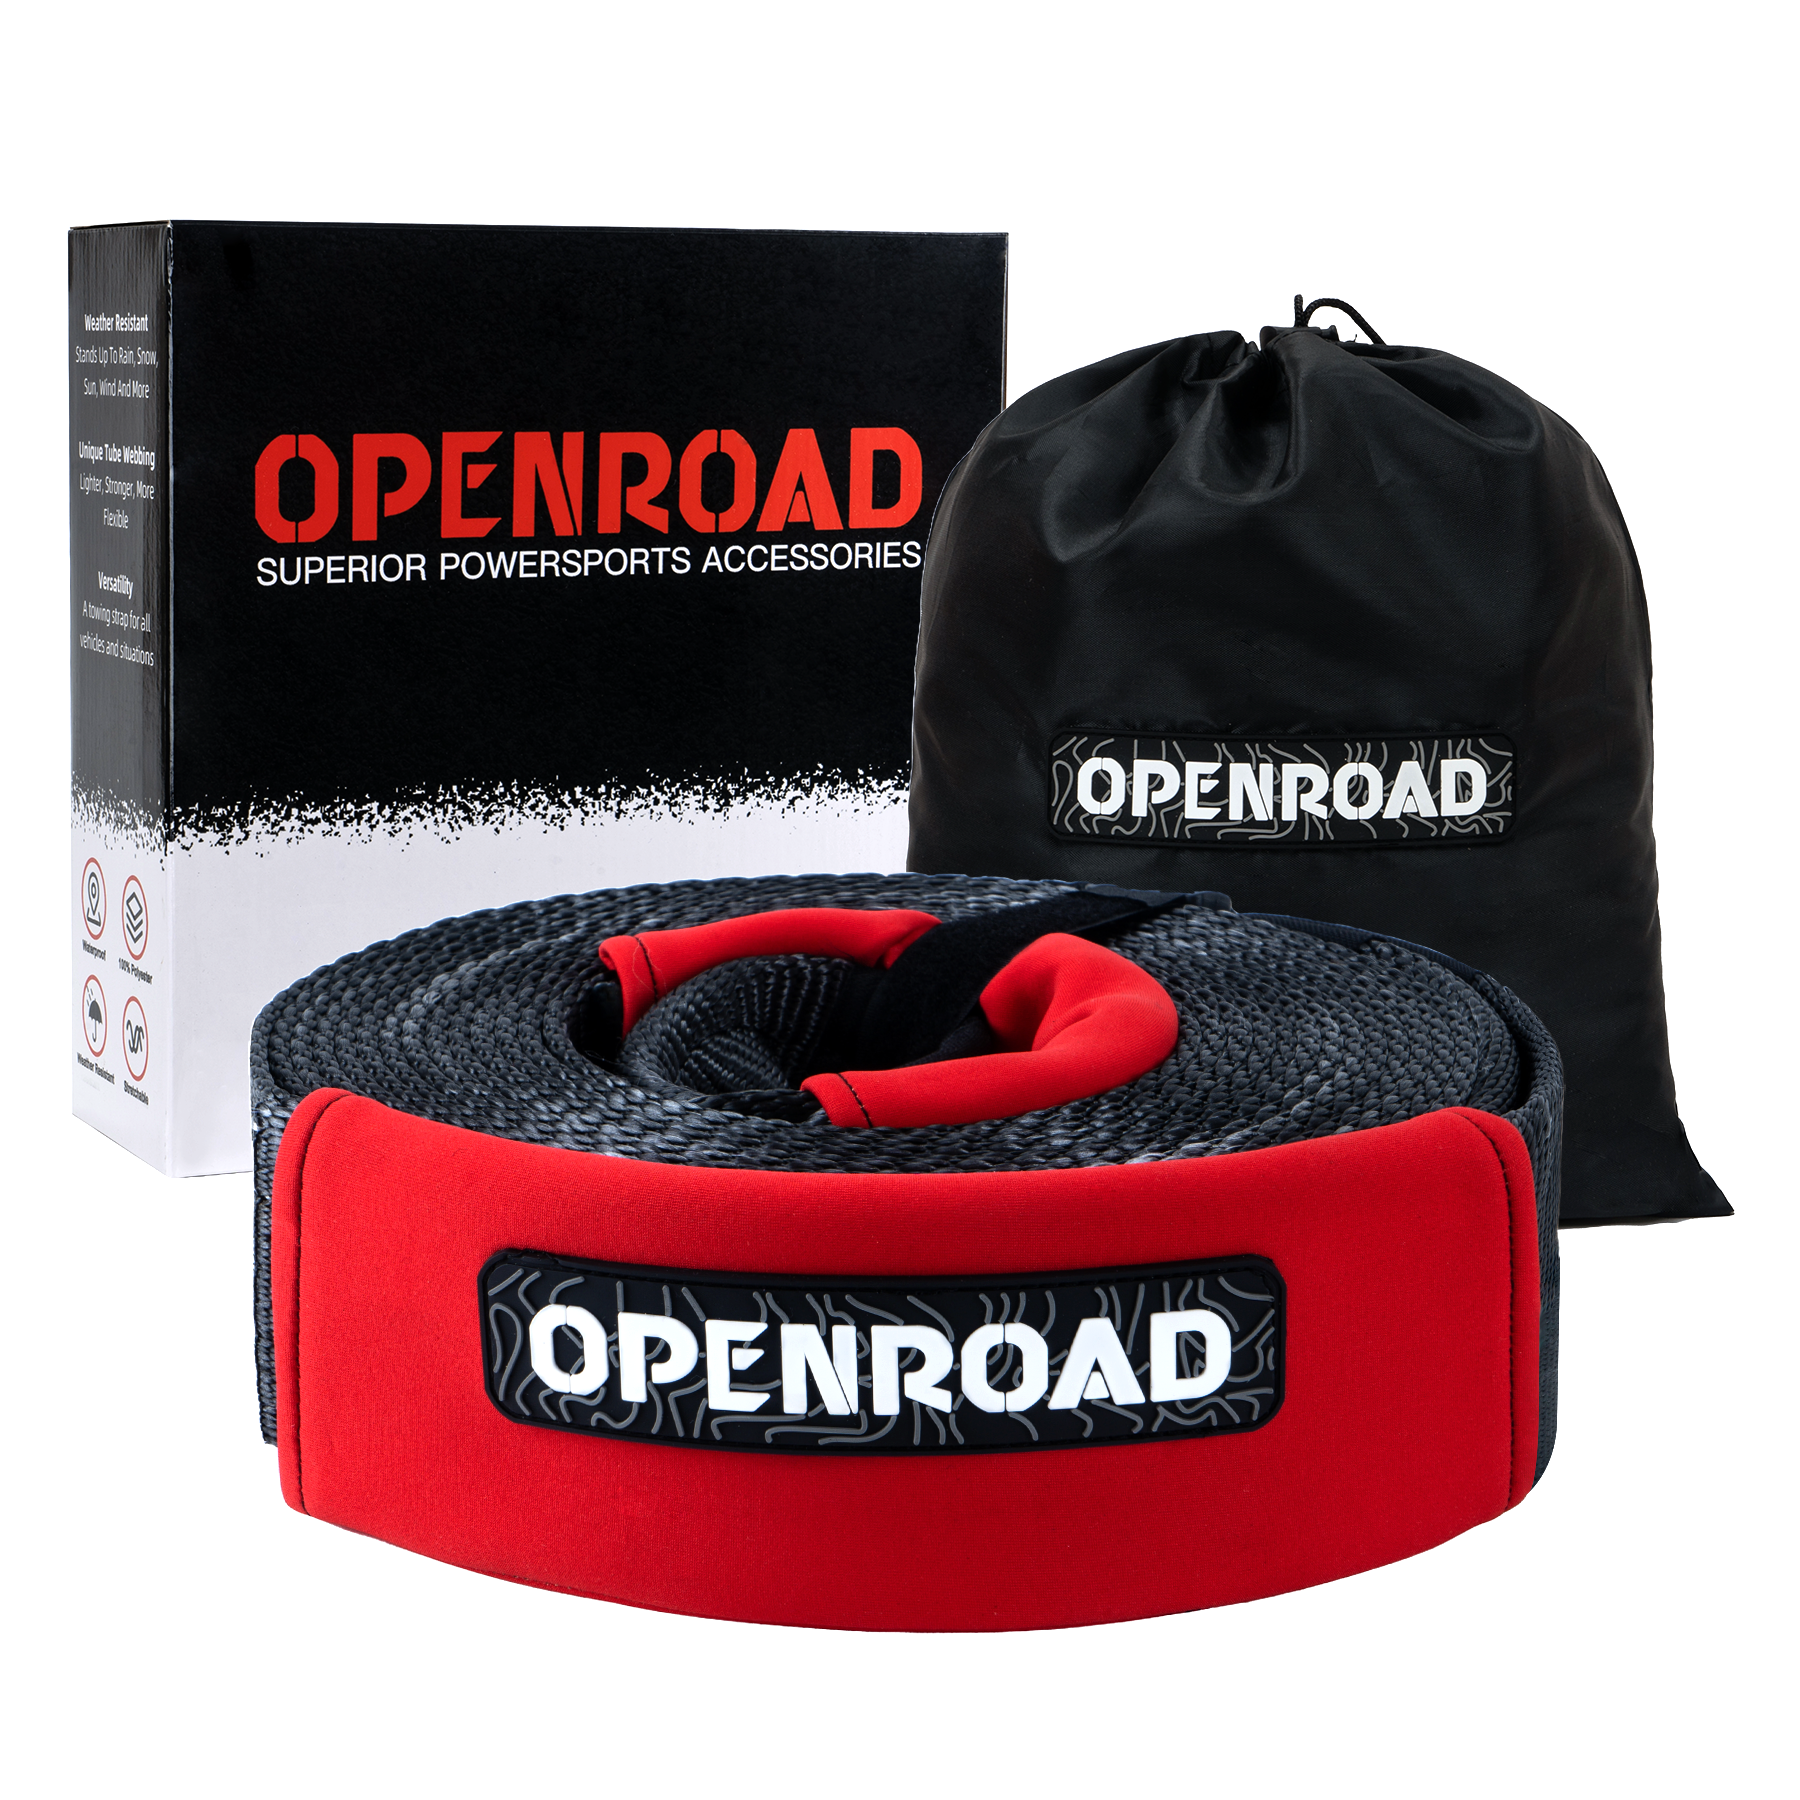 OPENROAD Nylon Heavy Duty Tow Strap Recovery Strap 3" x 30 ft (30,000 lbs) Snatch Strap,  Storage Bag  openroad4wd.com 3" x 30' Tow Strap  